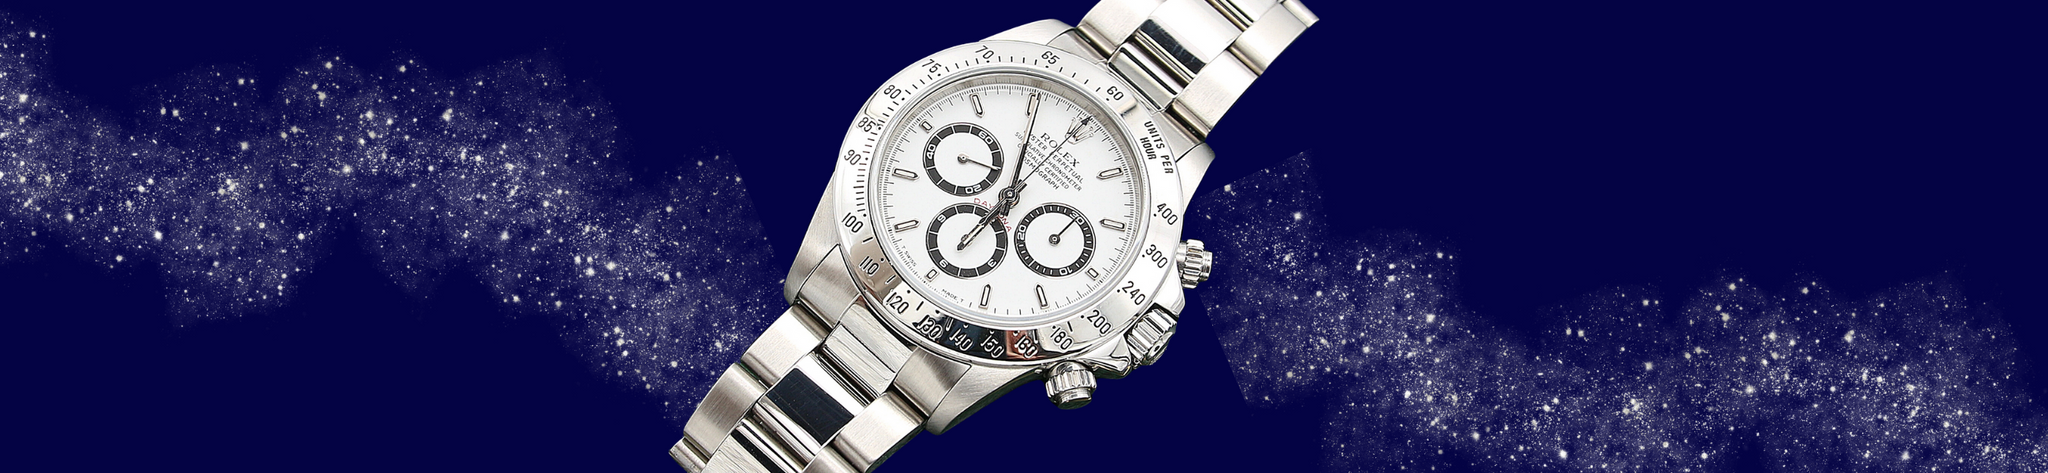 The Legendary Rolex Daytona: The History of this Iconic Watch